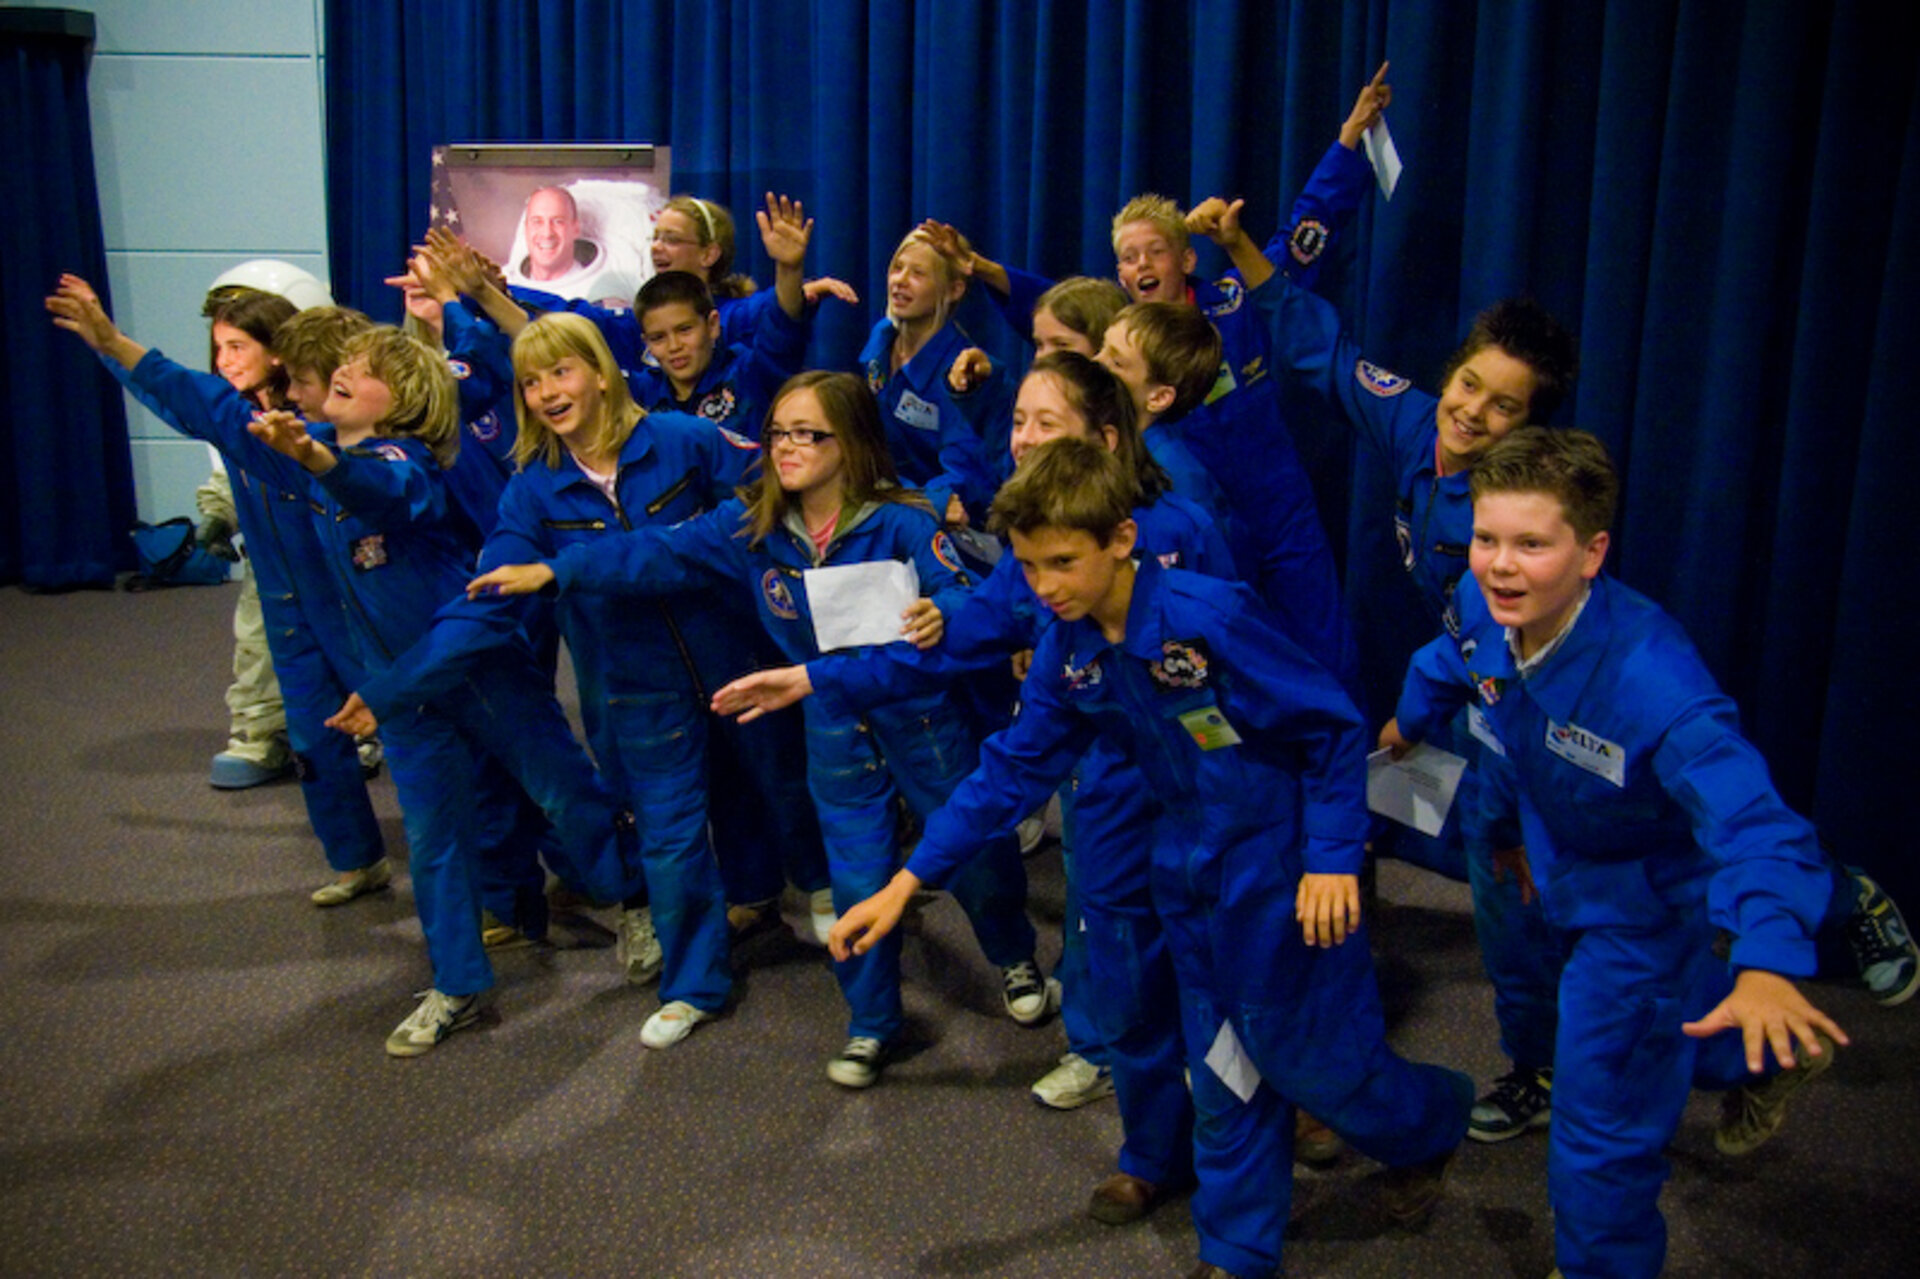 Students gathered at Space Expo for the ARISS contact